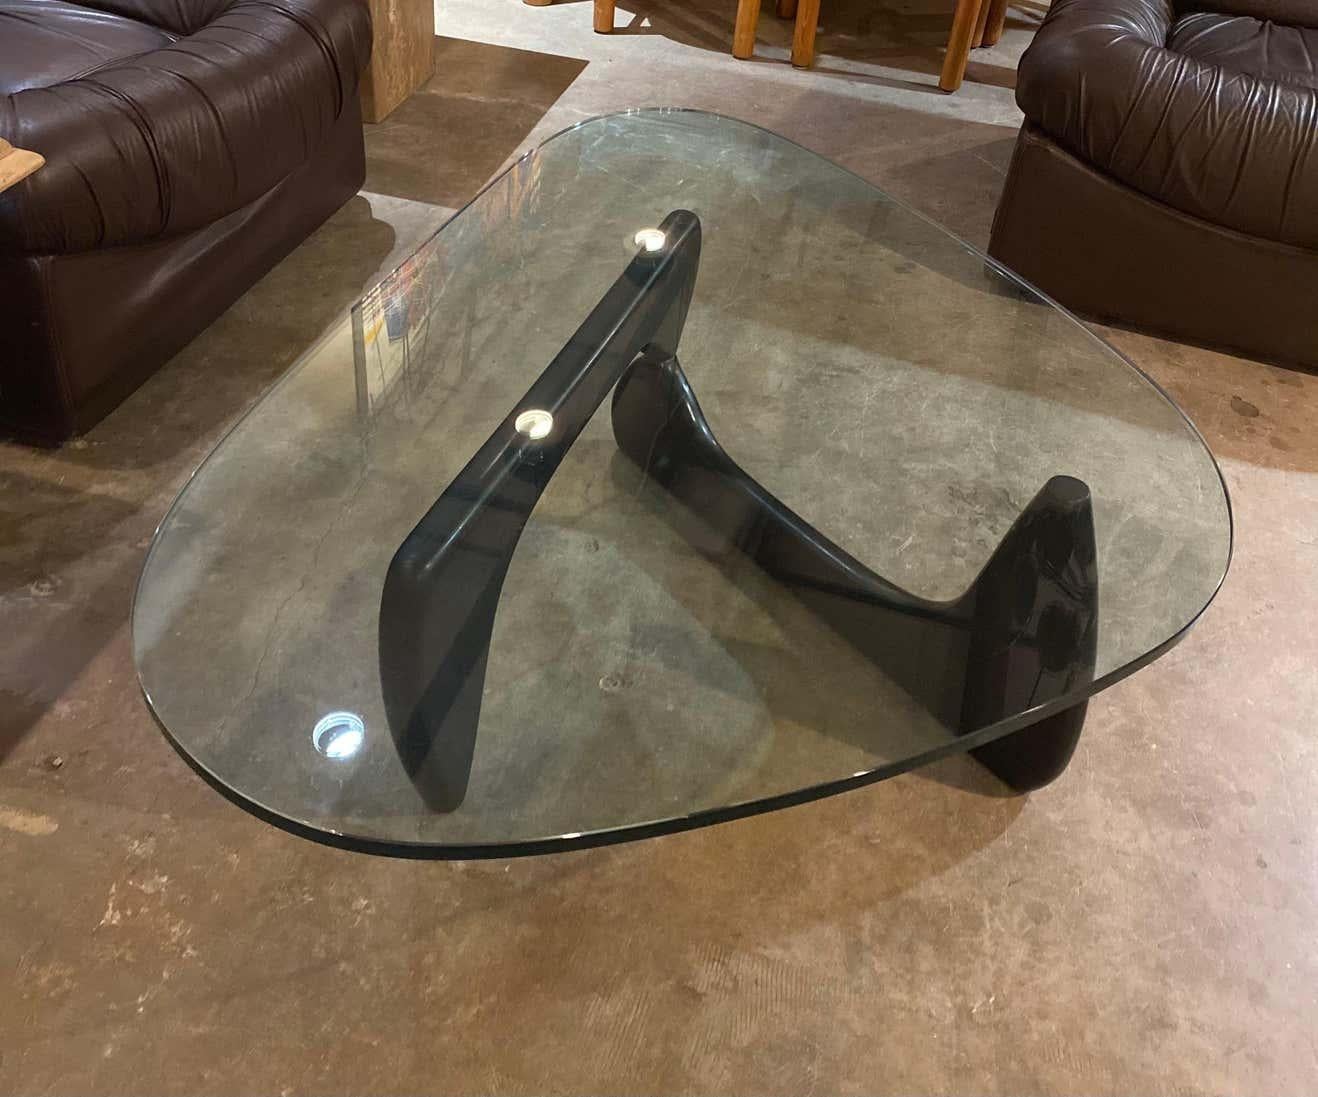 Beautiful Mid-Century Modern coffee table designed by Isamu Noguchi for Herman Miller. 